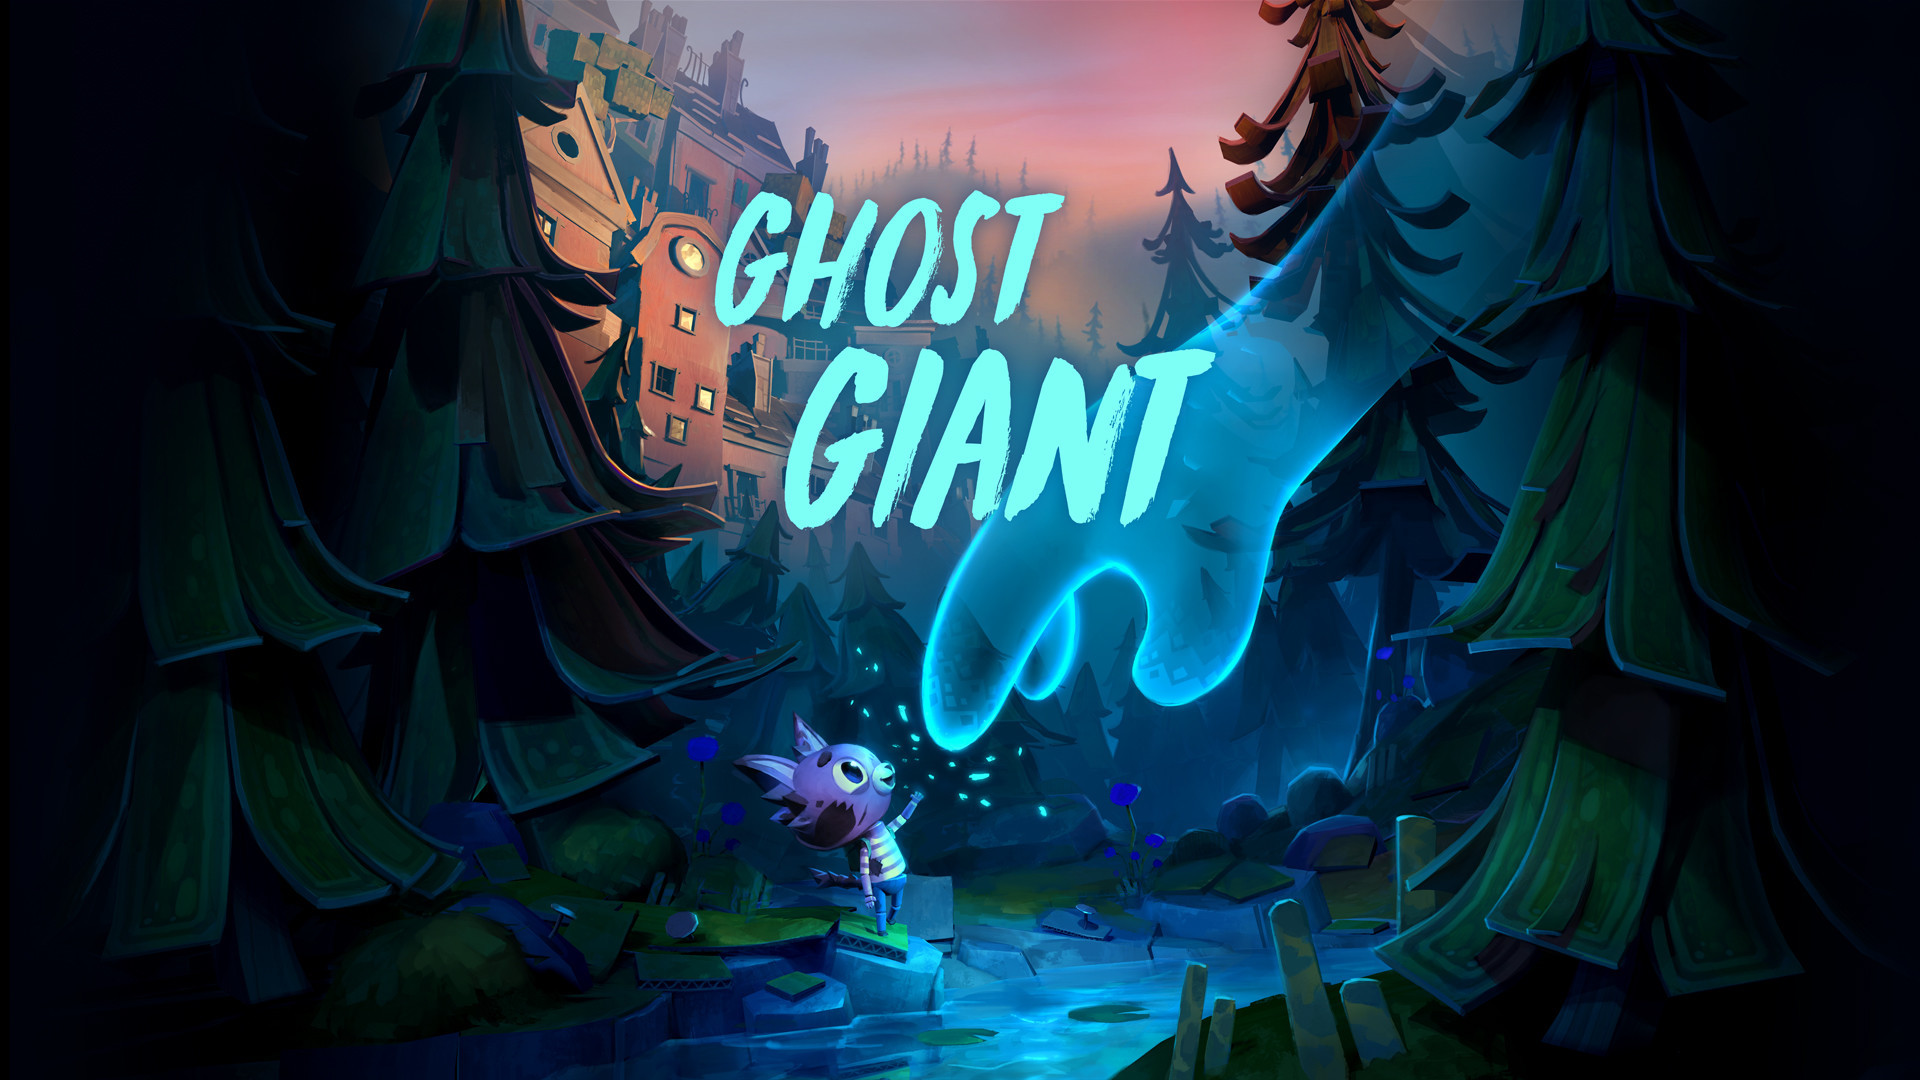 the ghost giant download free